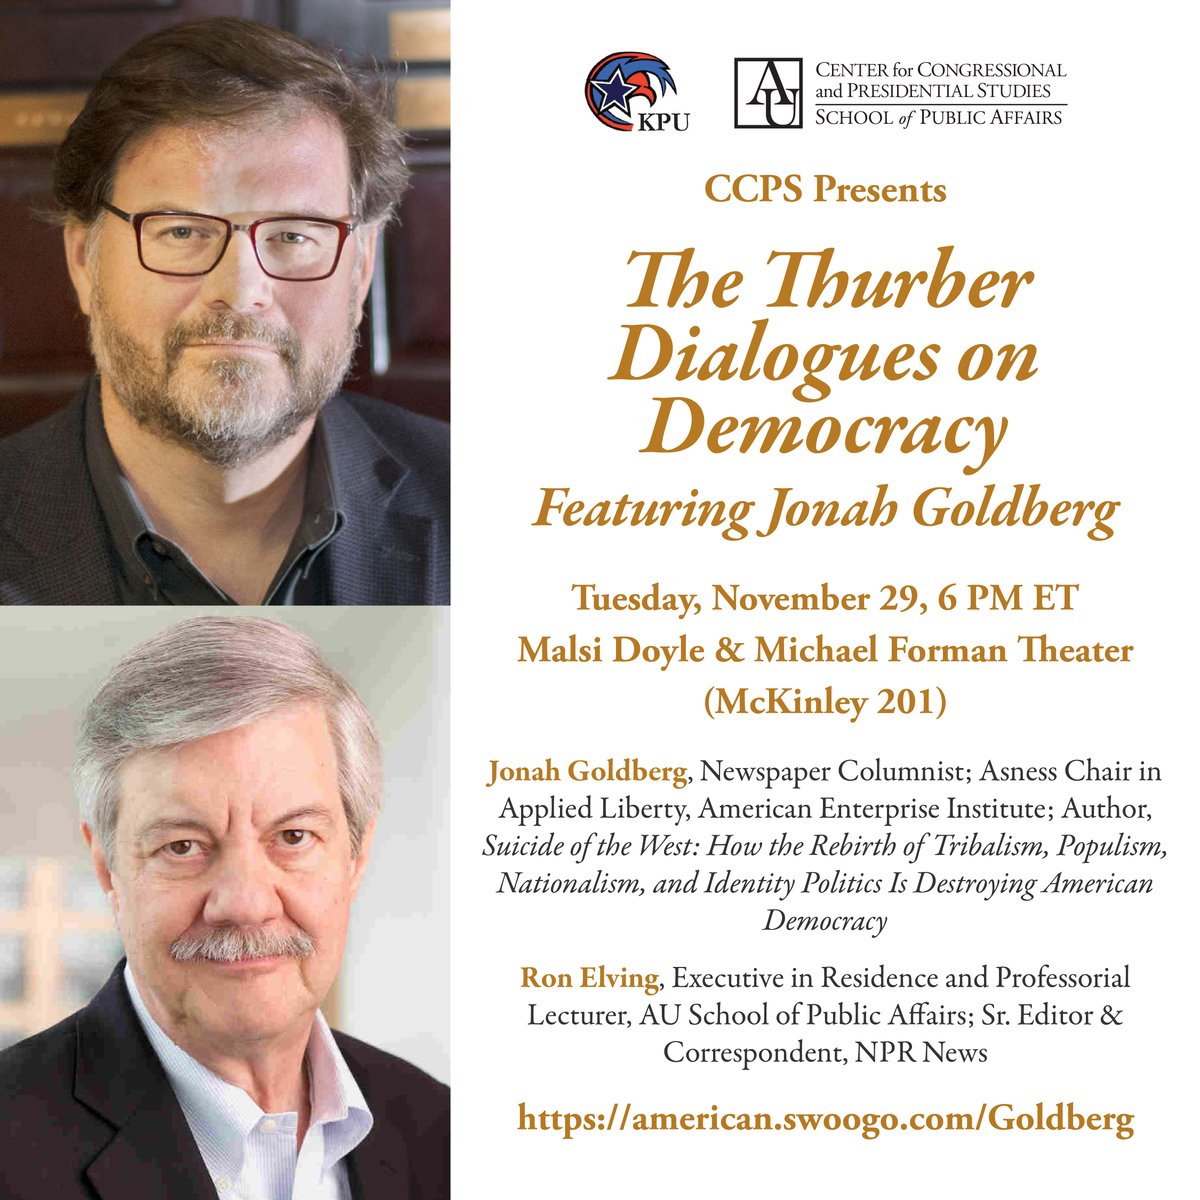 Tues., Nov. 29, at 6 p.m.: Join SPA’s @au_ccps, @AUSGKPU & Prof. @NPRrelving, for the in-person 2022 Fall Thurber Dialogue on Democracy, featuring @JonahDispatch, editor-in-chief at @TheDispatch & Asness Chair in Applied Liberty at @AEI. RSVP: bit.ly/3TiYpUS